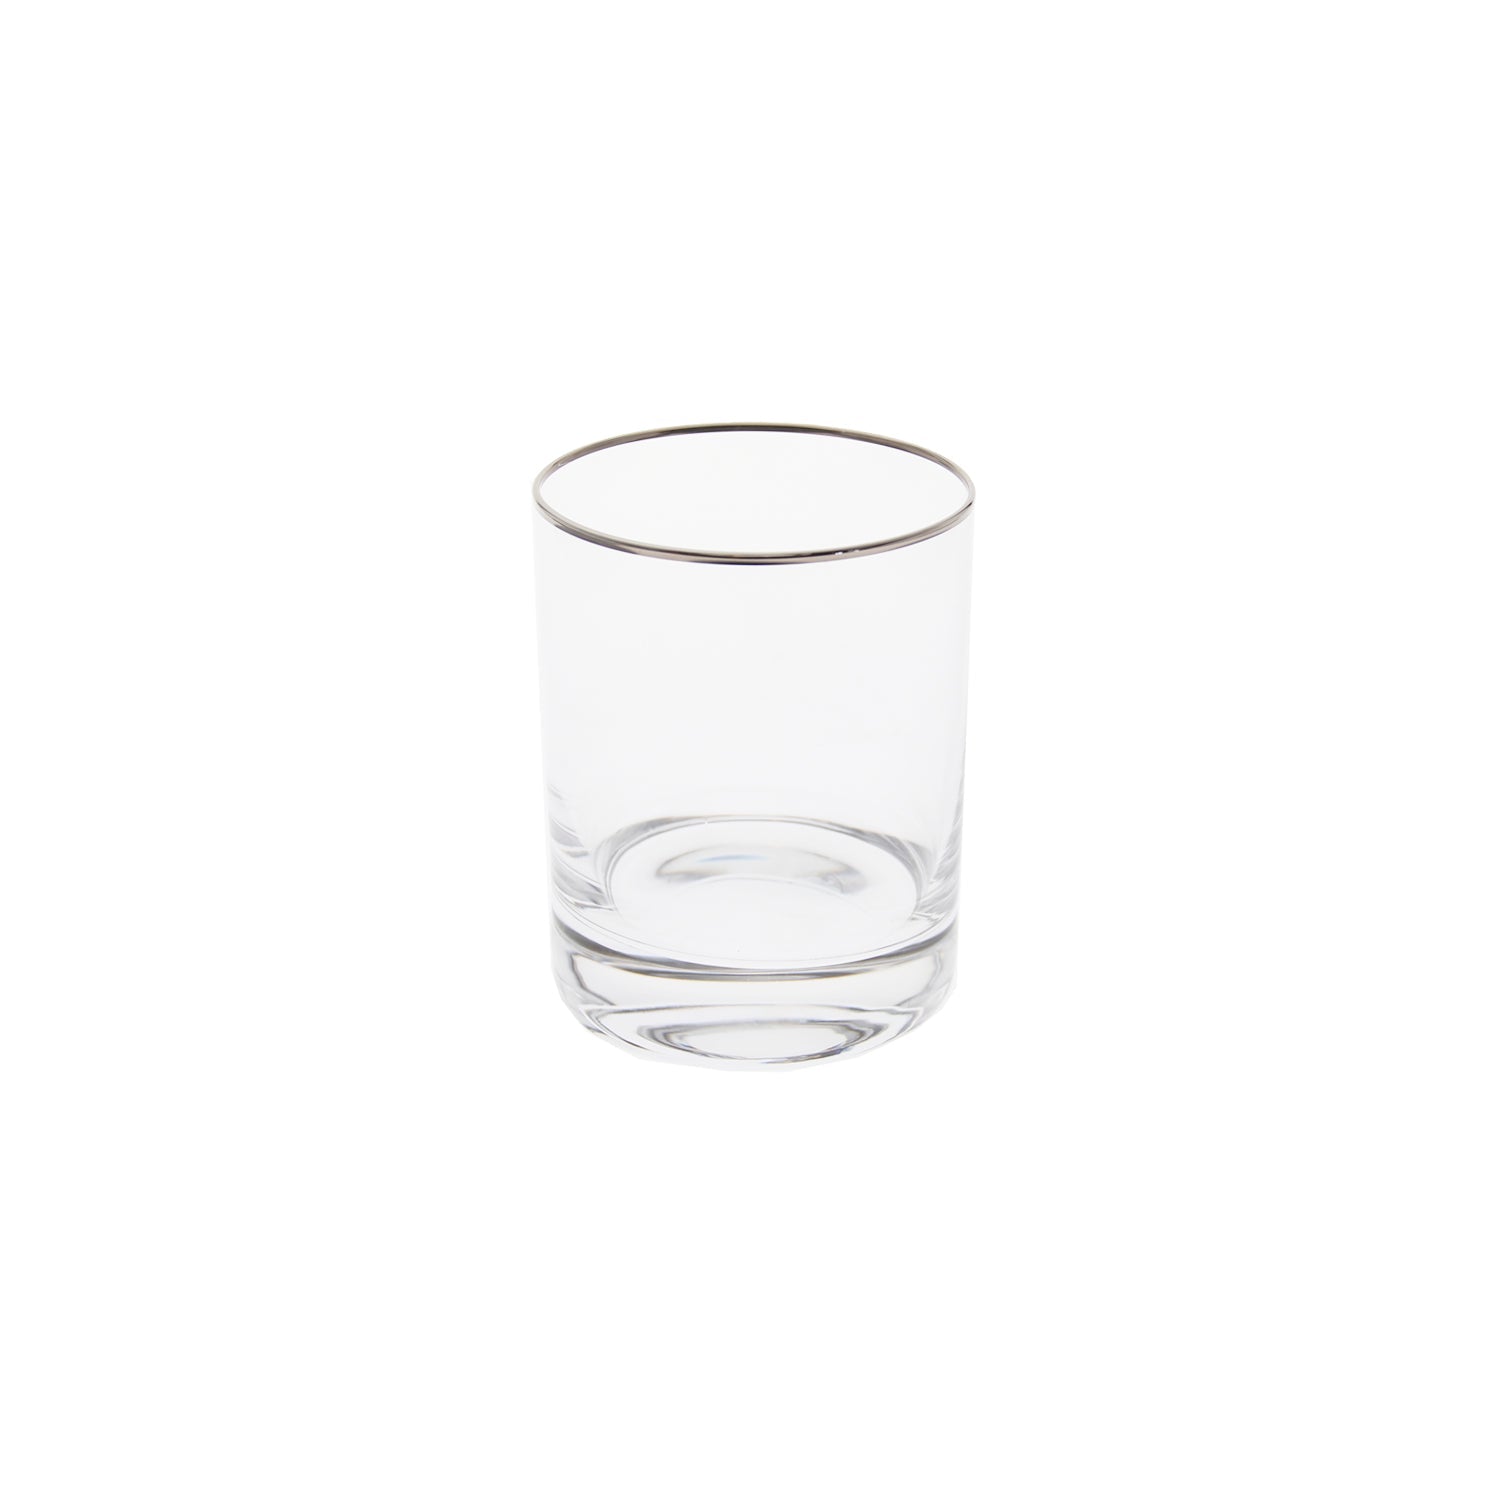 SILVER WHISKEY GLASS